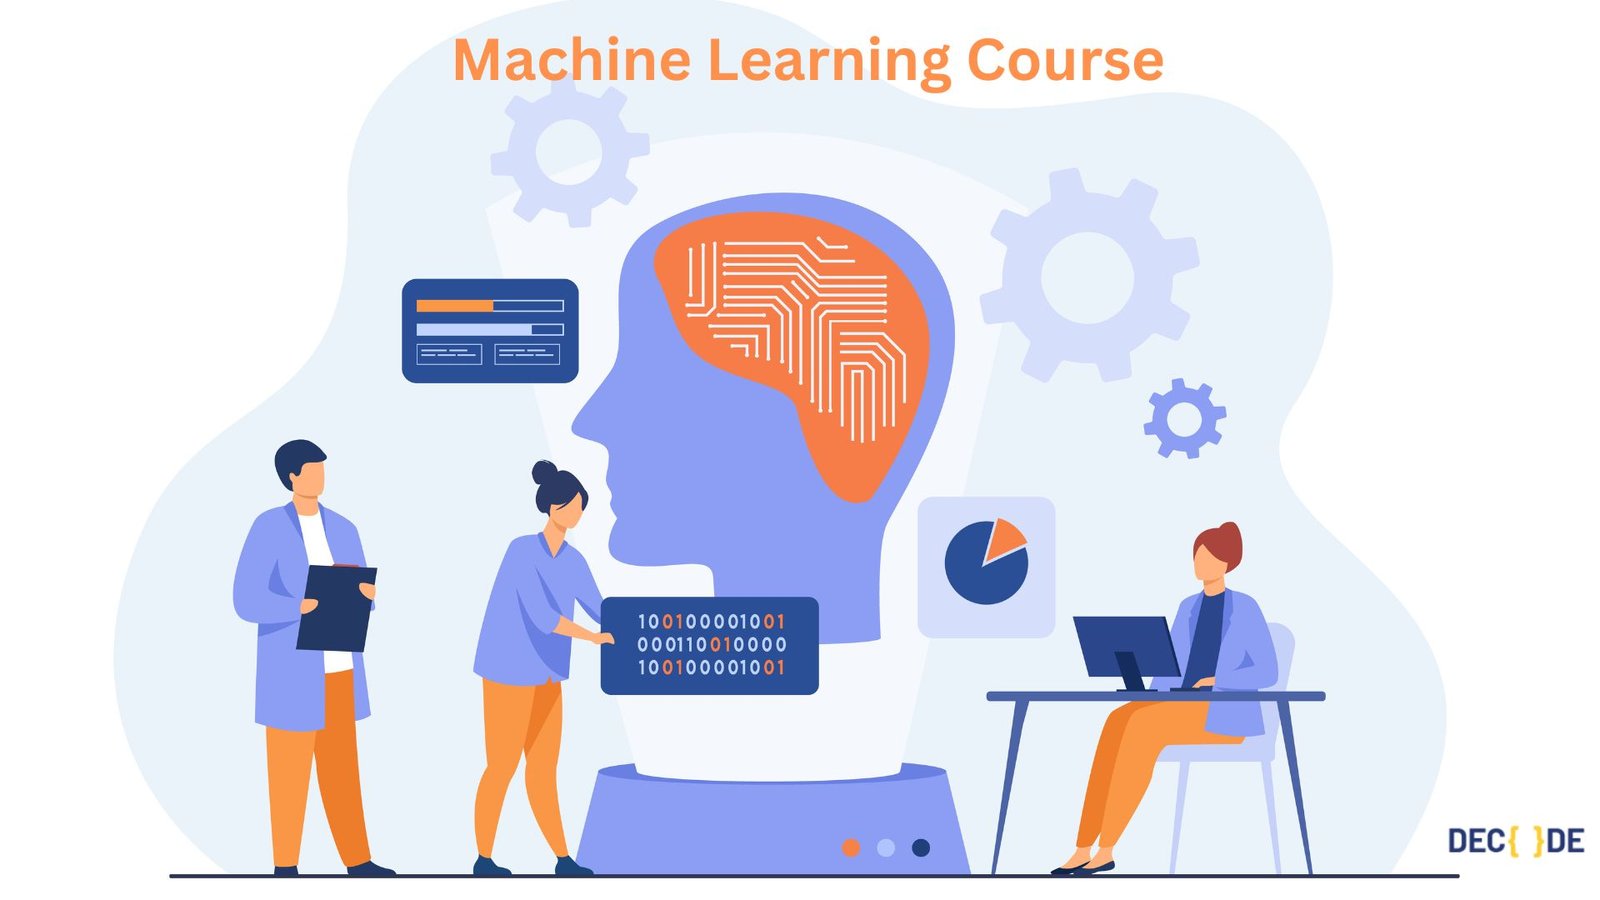 7 Things That Make Decode Learning The Best Place For Machine Learning Course